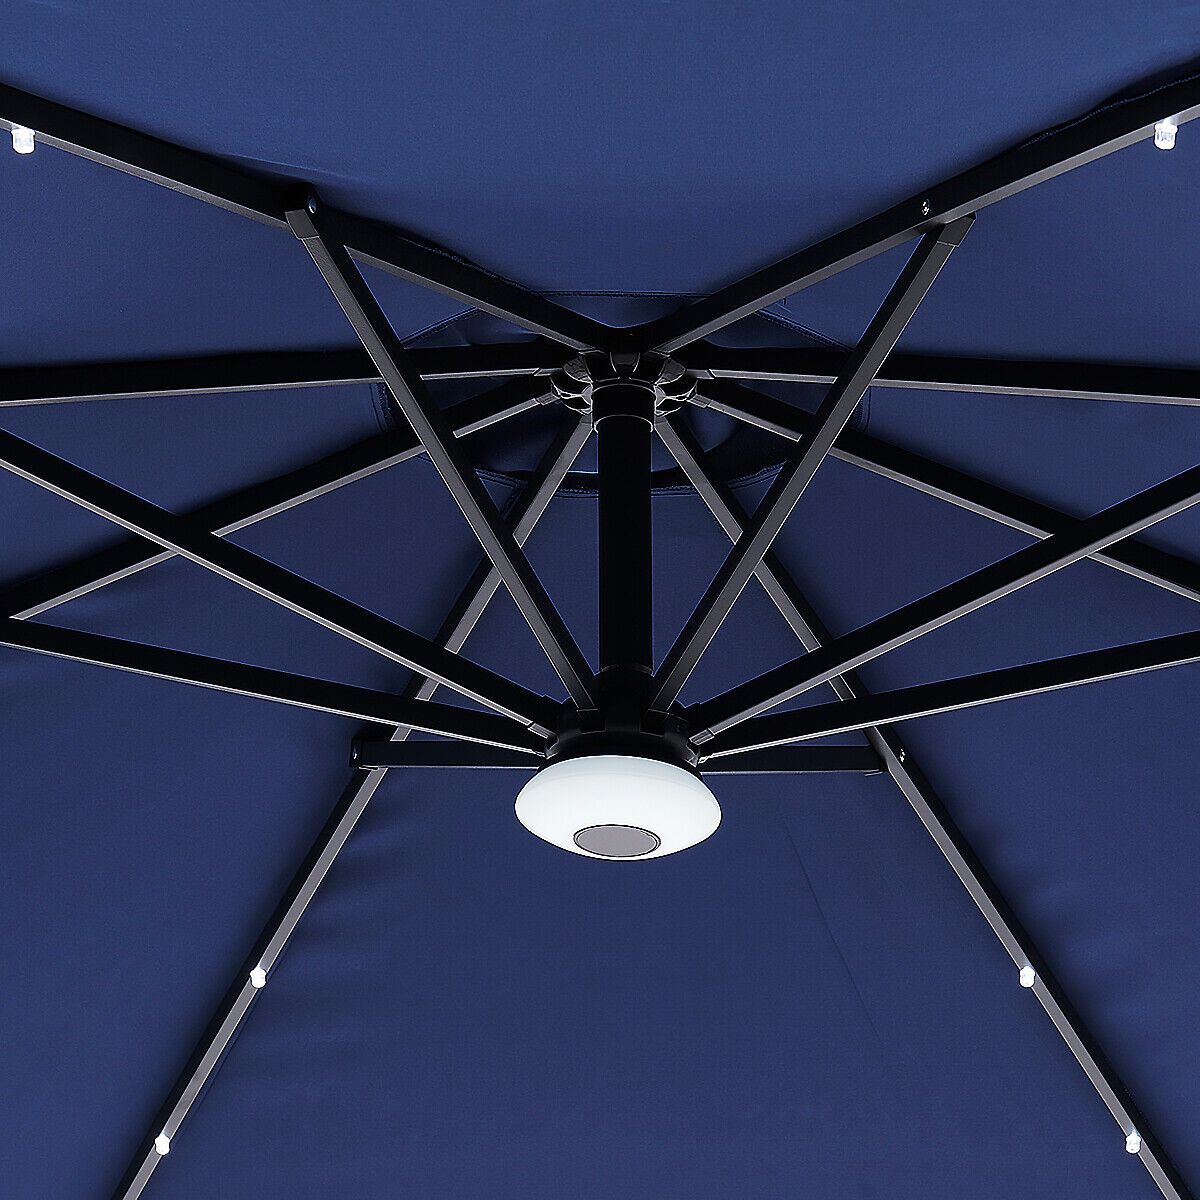 Offset Hanging Umbrella With LED Lights and Steel Ribs For Outdoor Use